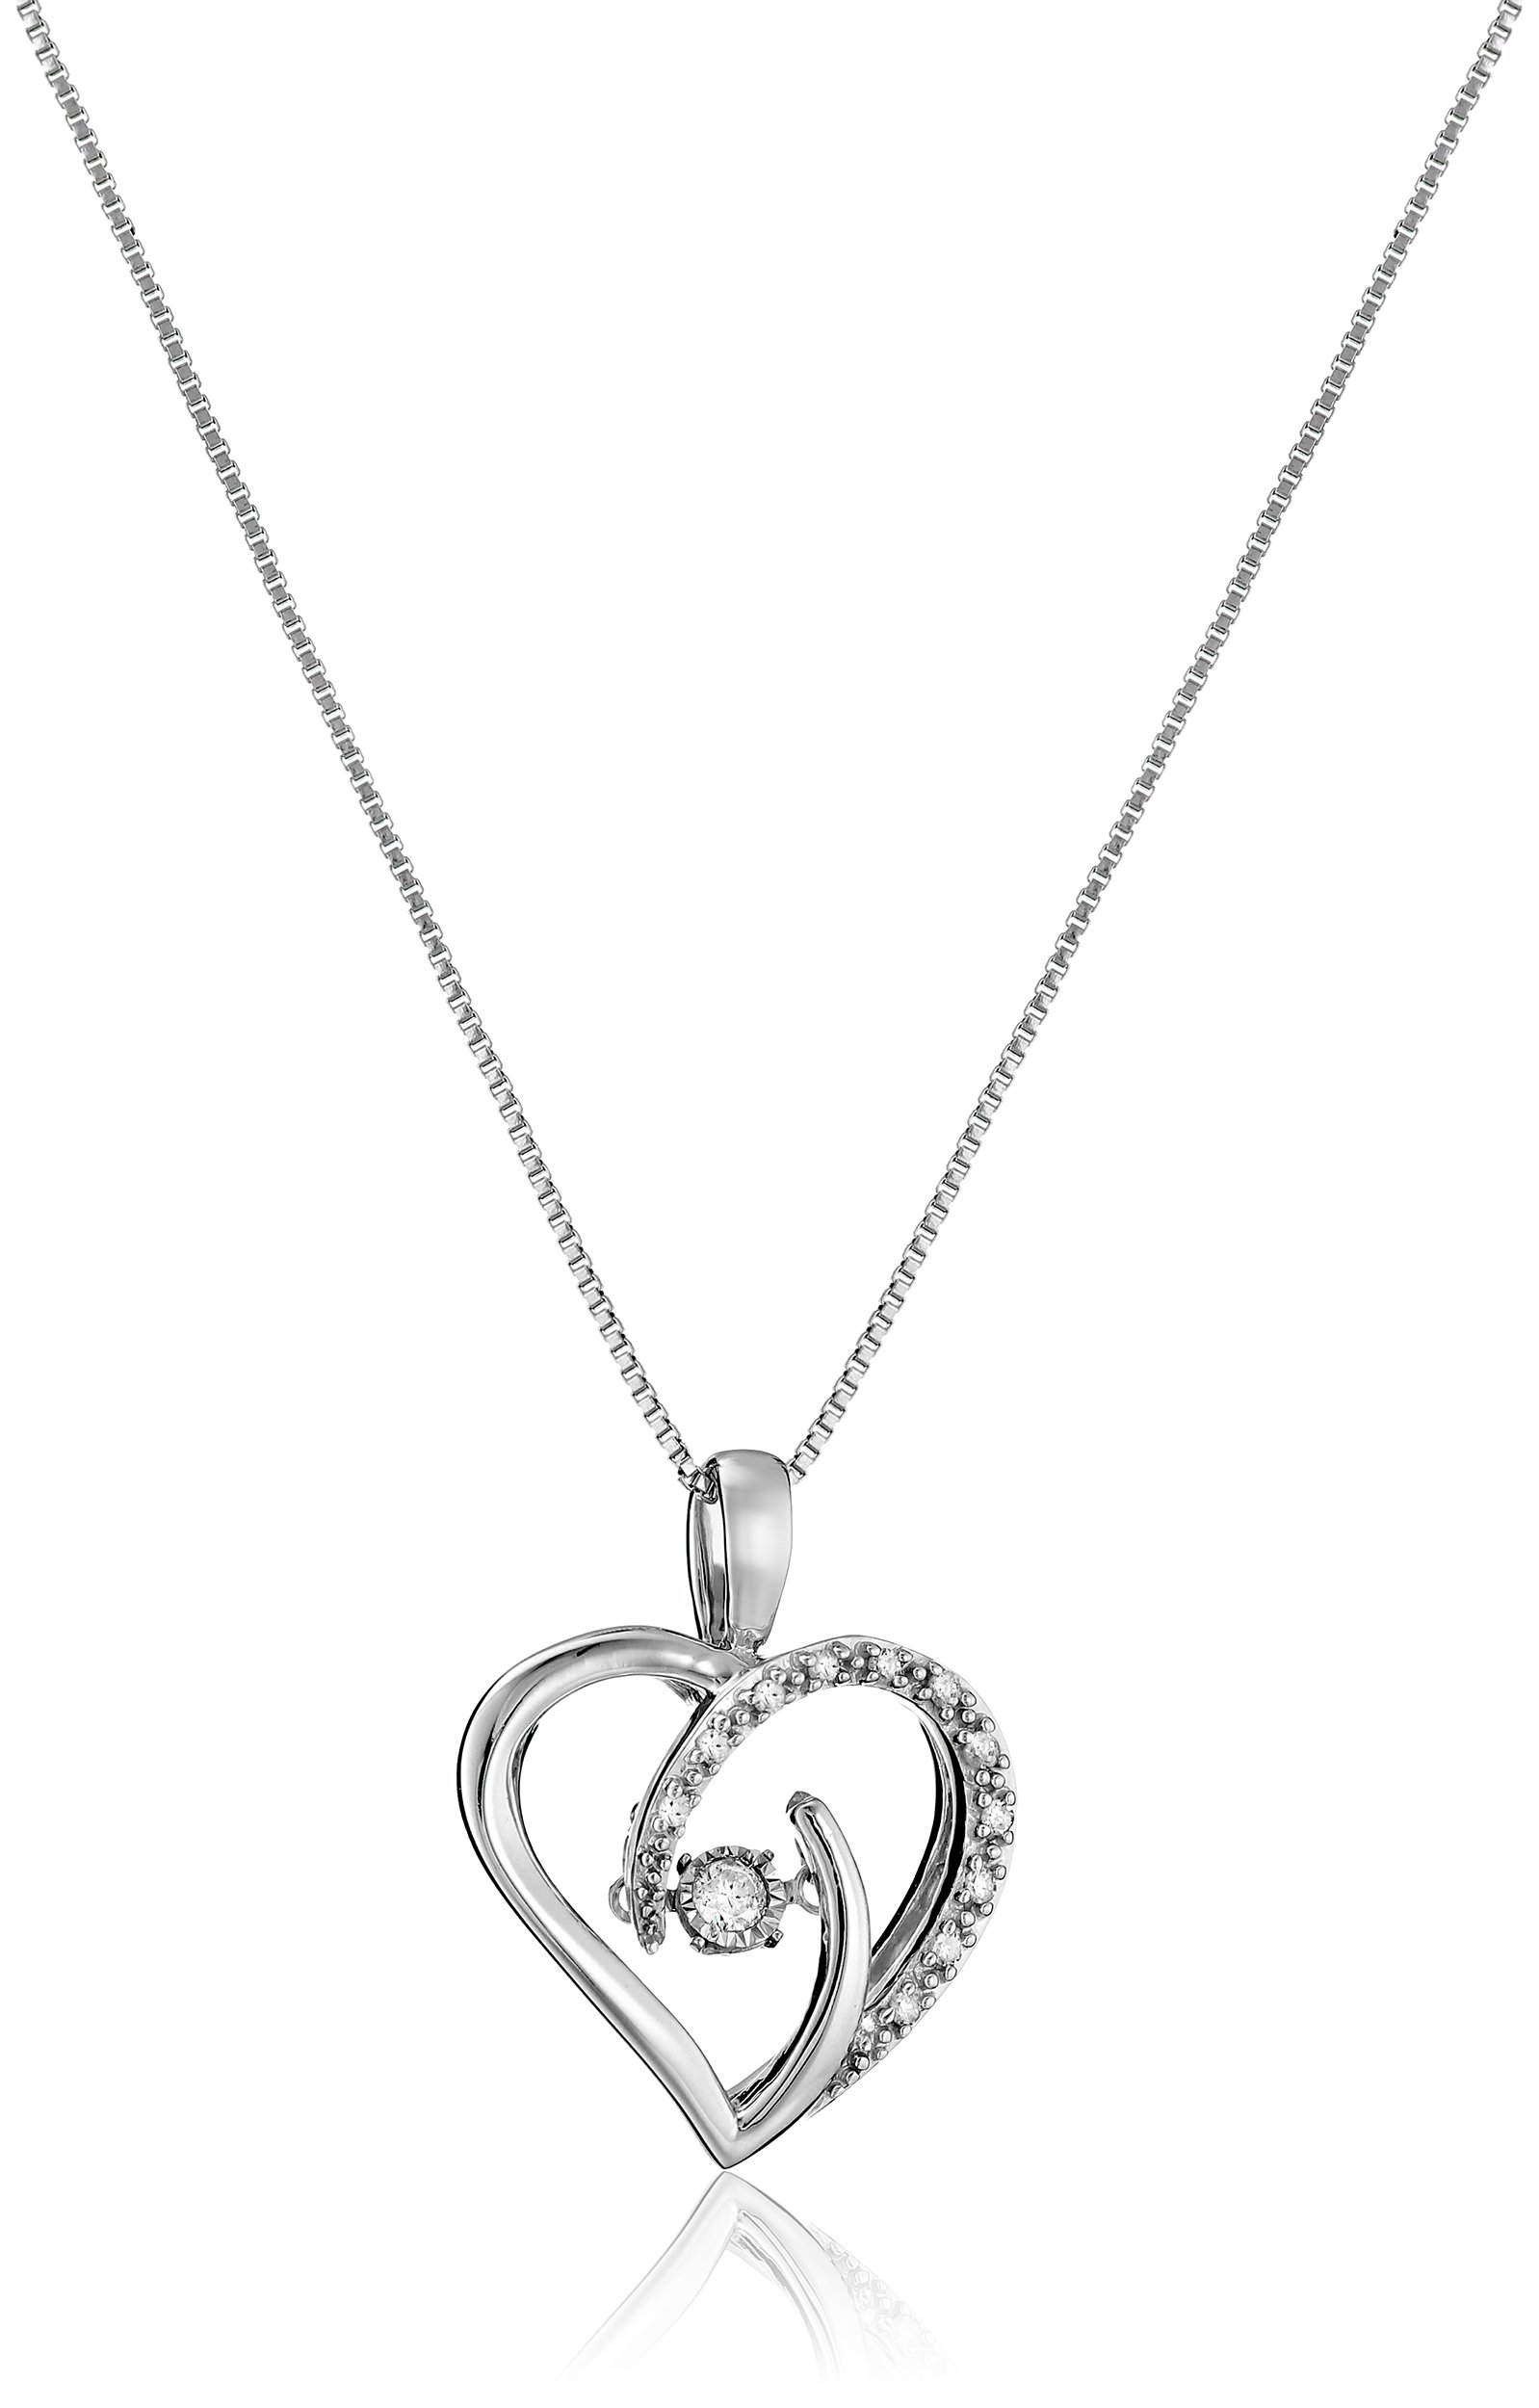 Amazon Collection 1/10 Carat Dancing Diamond Heart Pendant Necklace for Women in Sterling Silver with 18 Inch Box Chain (0.1cttw, J-K Color, I2-I3 Clarity)